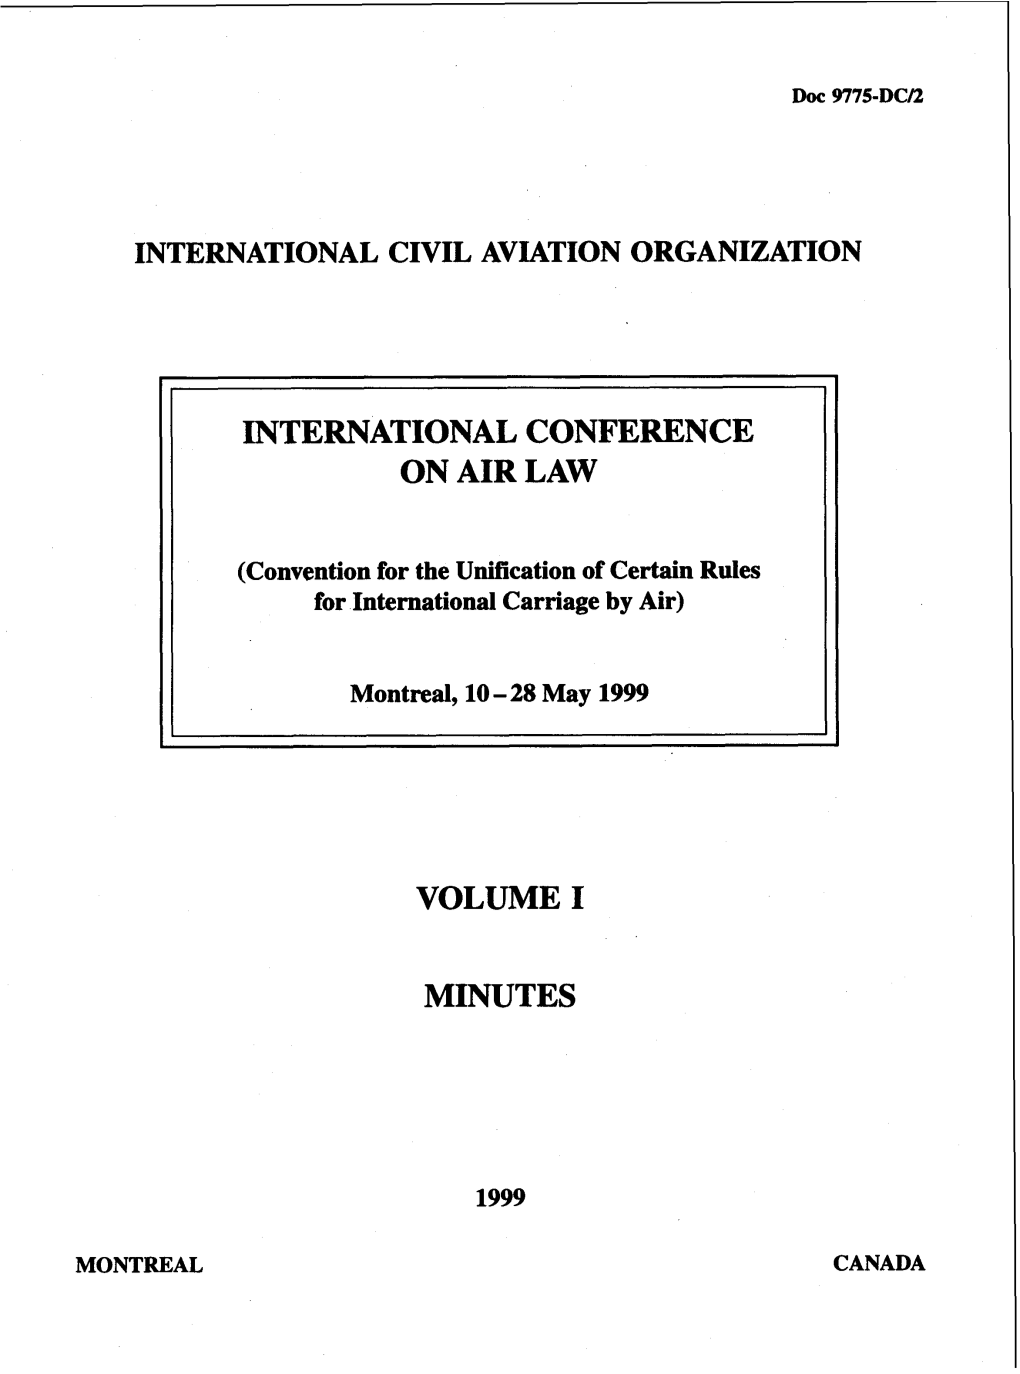 International Conference on Air Law: Volume I